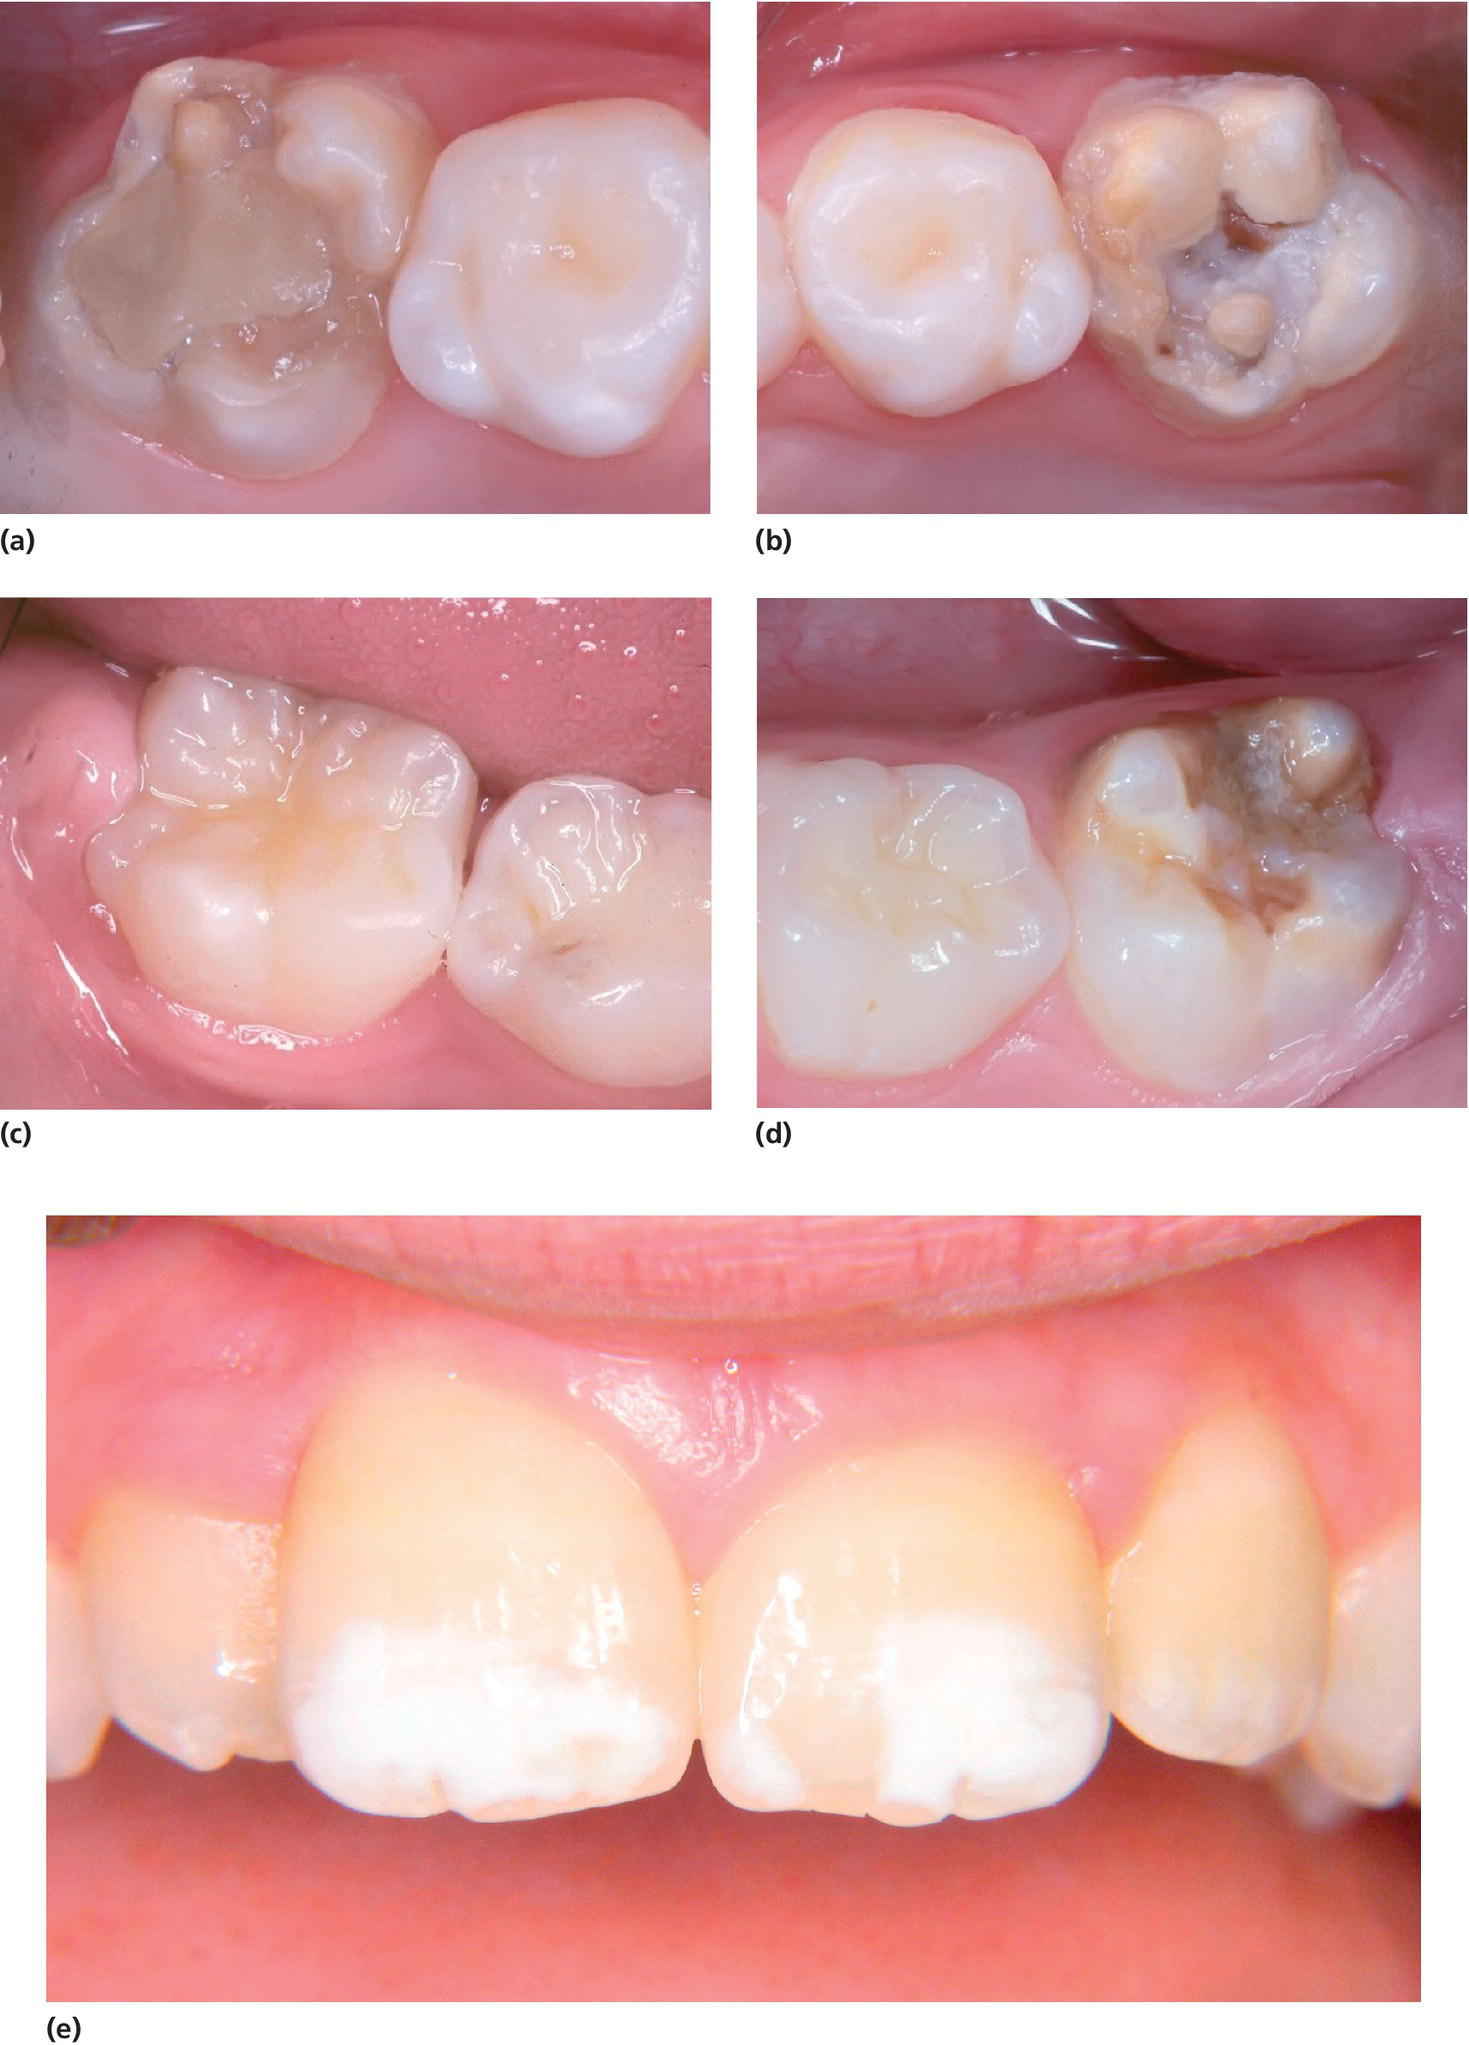 Photos of molar–incisor hypomineralization in 8‐year‐old. They display 16 with a defective restoration, 26 with disintegrated enamel and caries, 46 healthy, 36 disintegrated enamel, and demarcated opacitie.